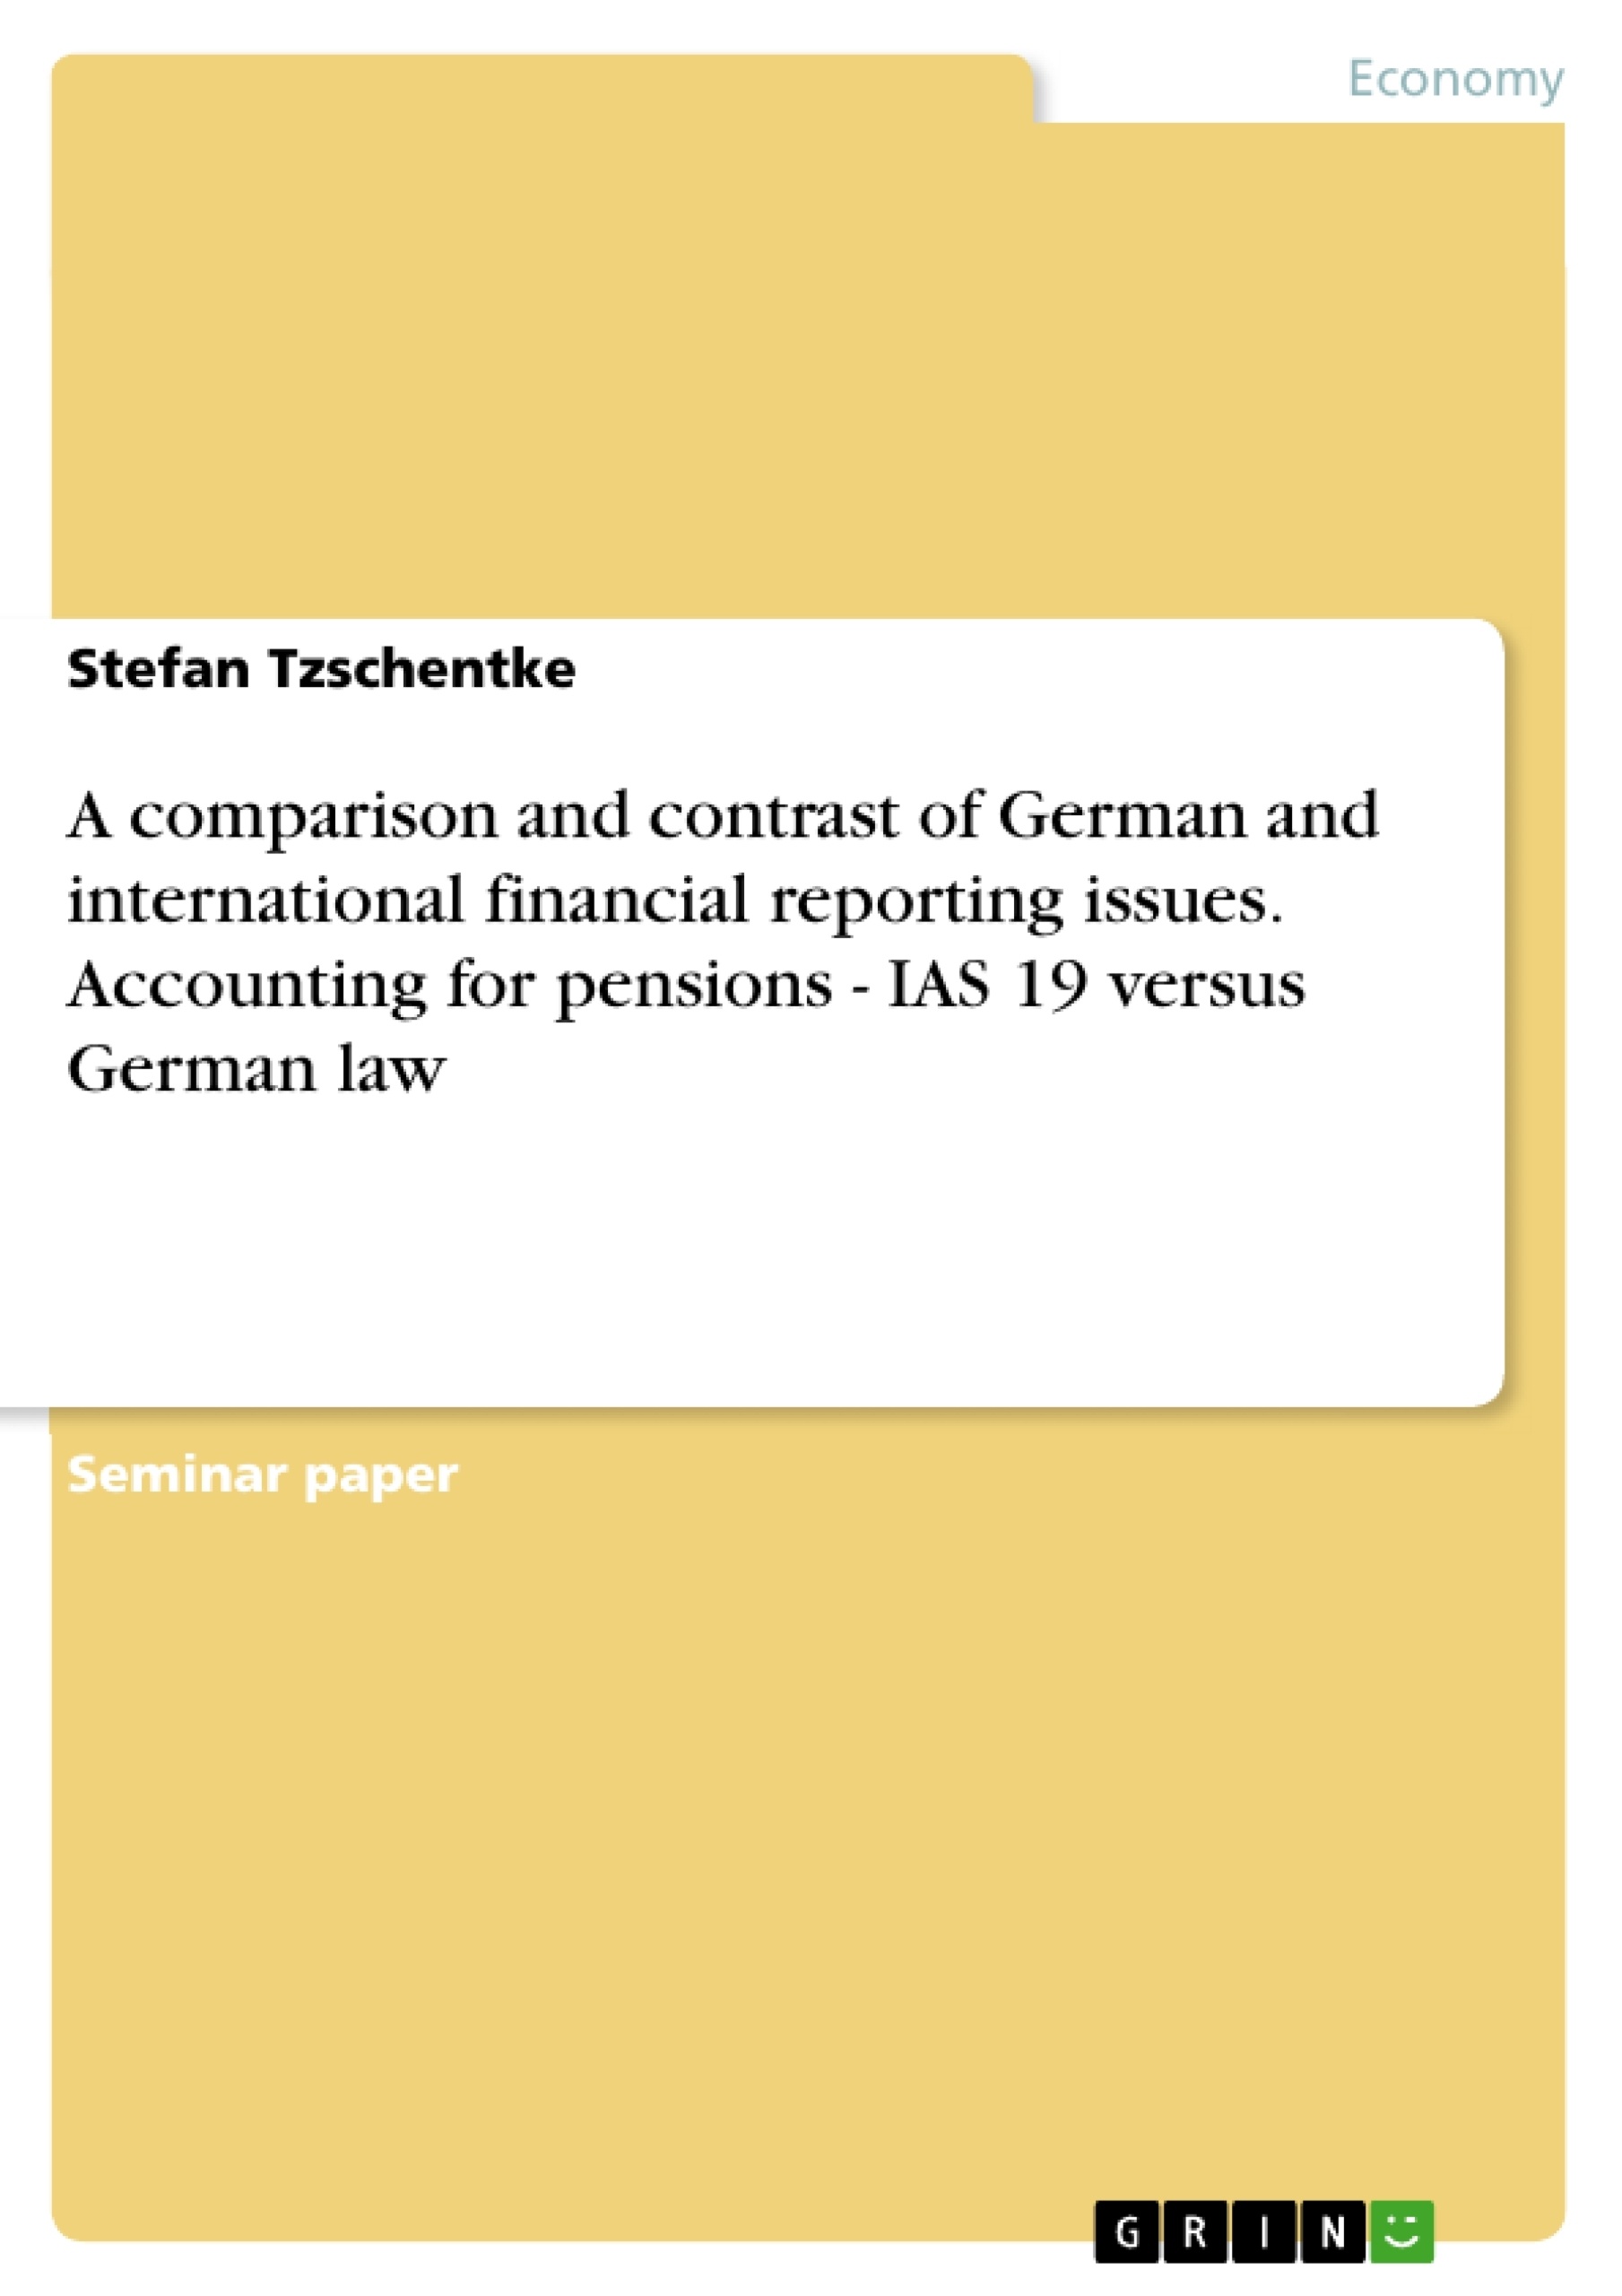 Título: A comparison and contrast of German and international financial reporting issues. Accounting for pensions - IAS 19 versus German law 